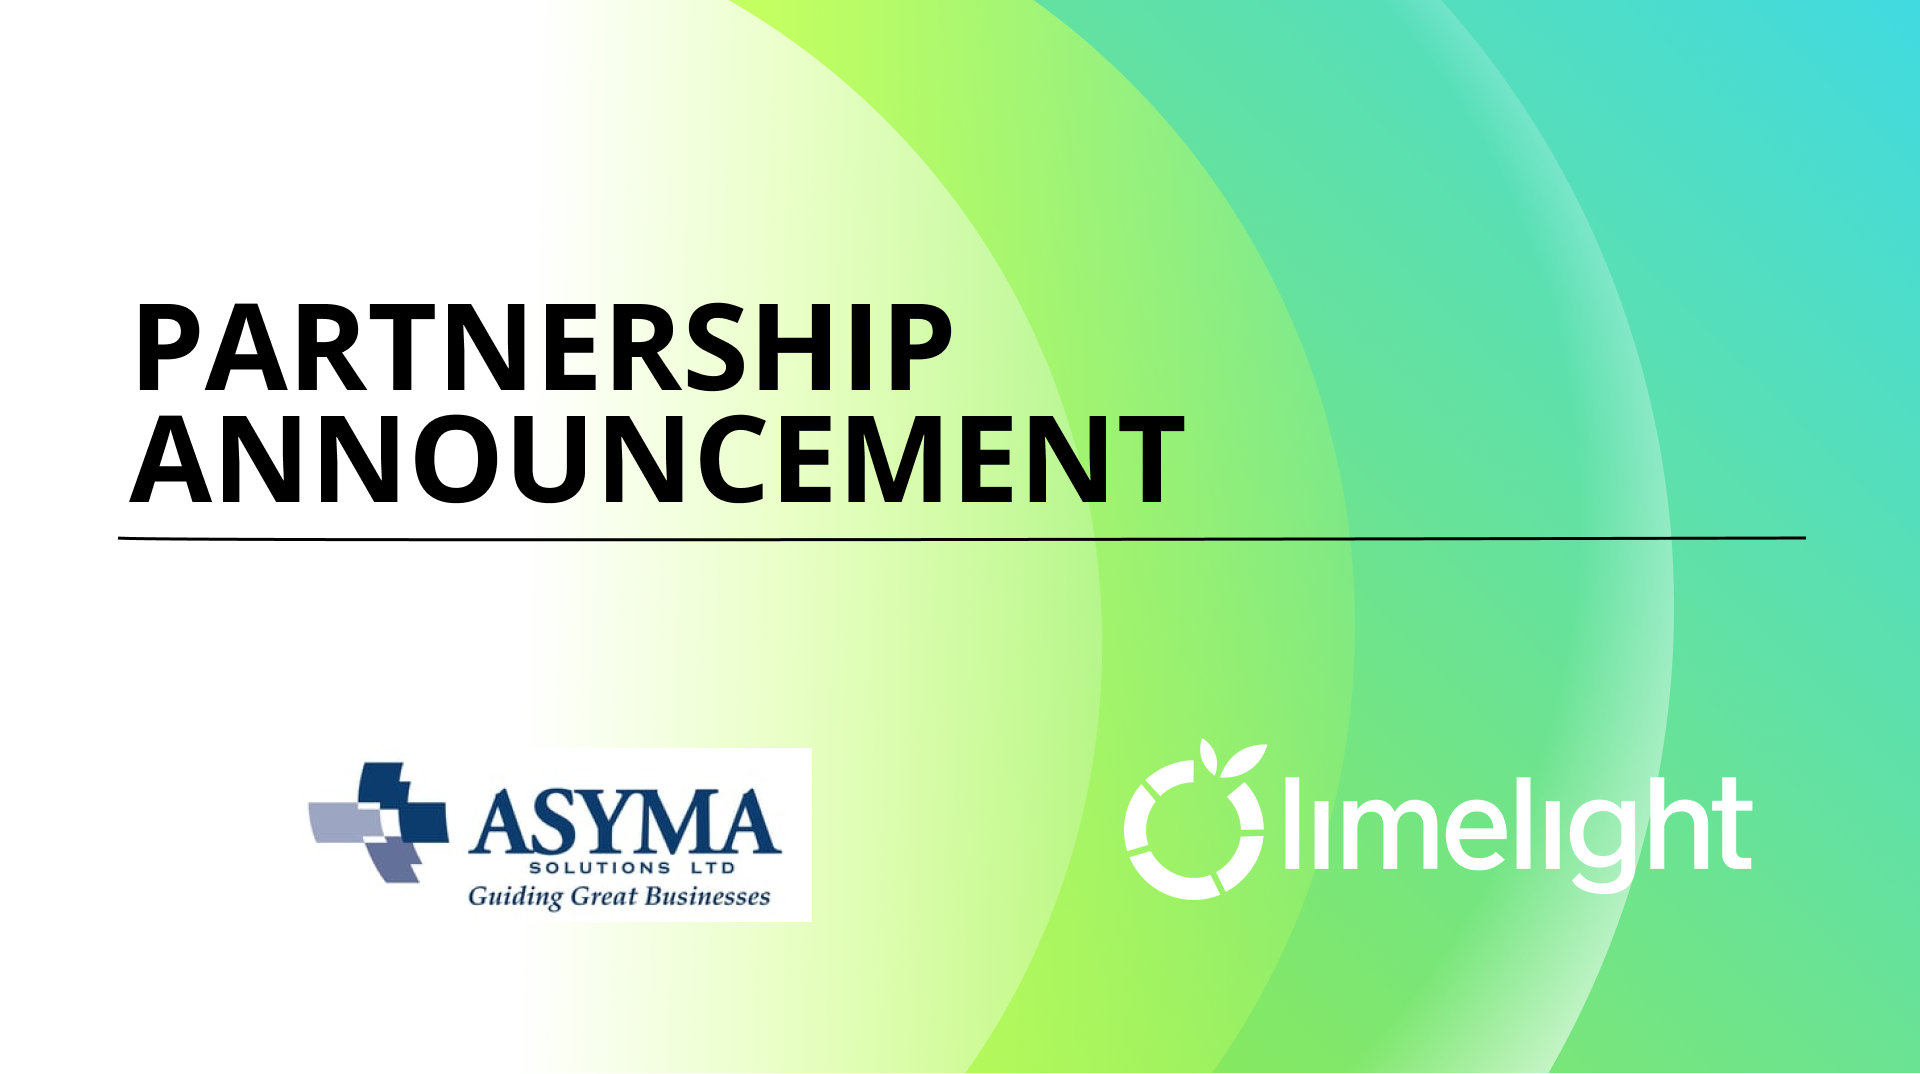 Asyma Solutions and Limelight Announce New Partnership to Empower Sage & Sage Intacct Users